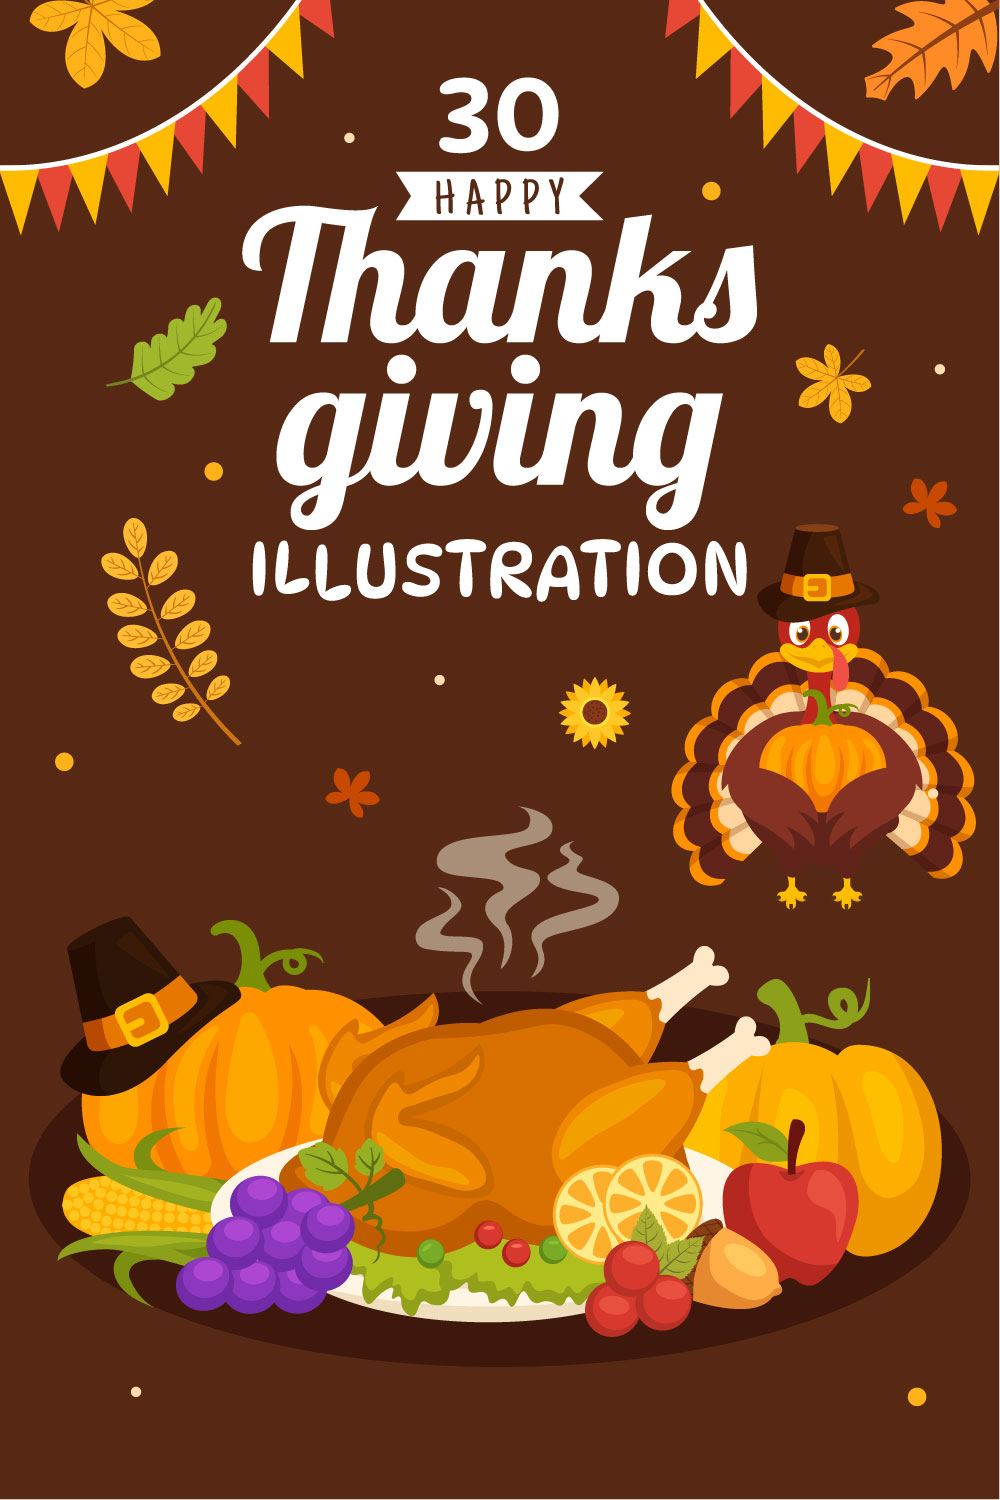 30 Happy Thanksgiving Day Illustration pinterest preview image.